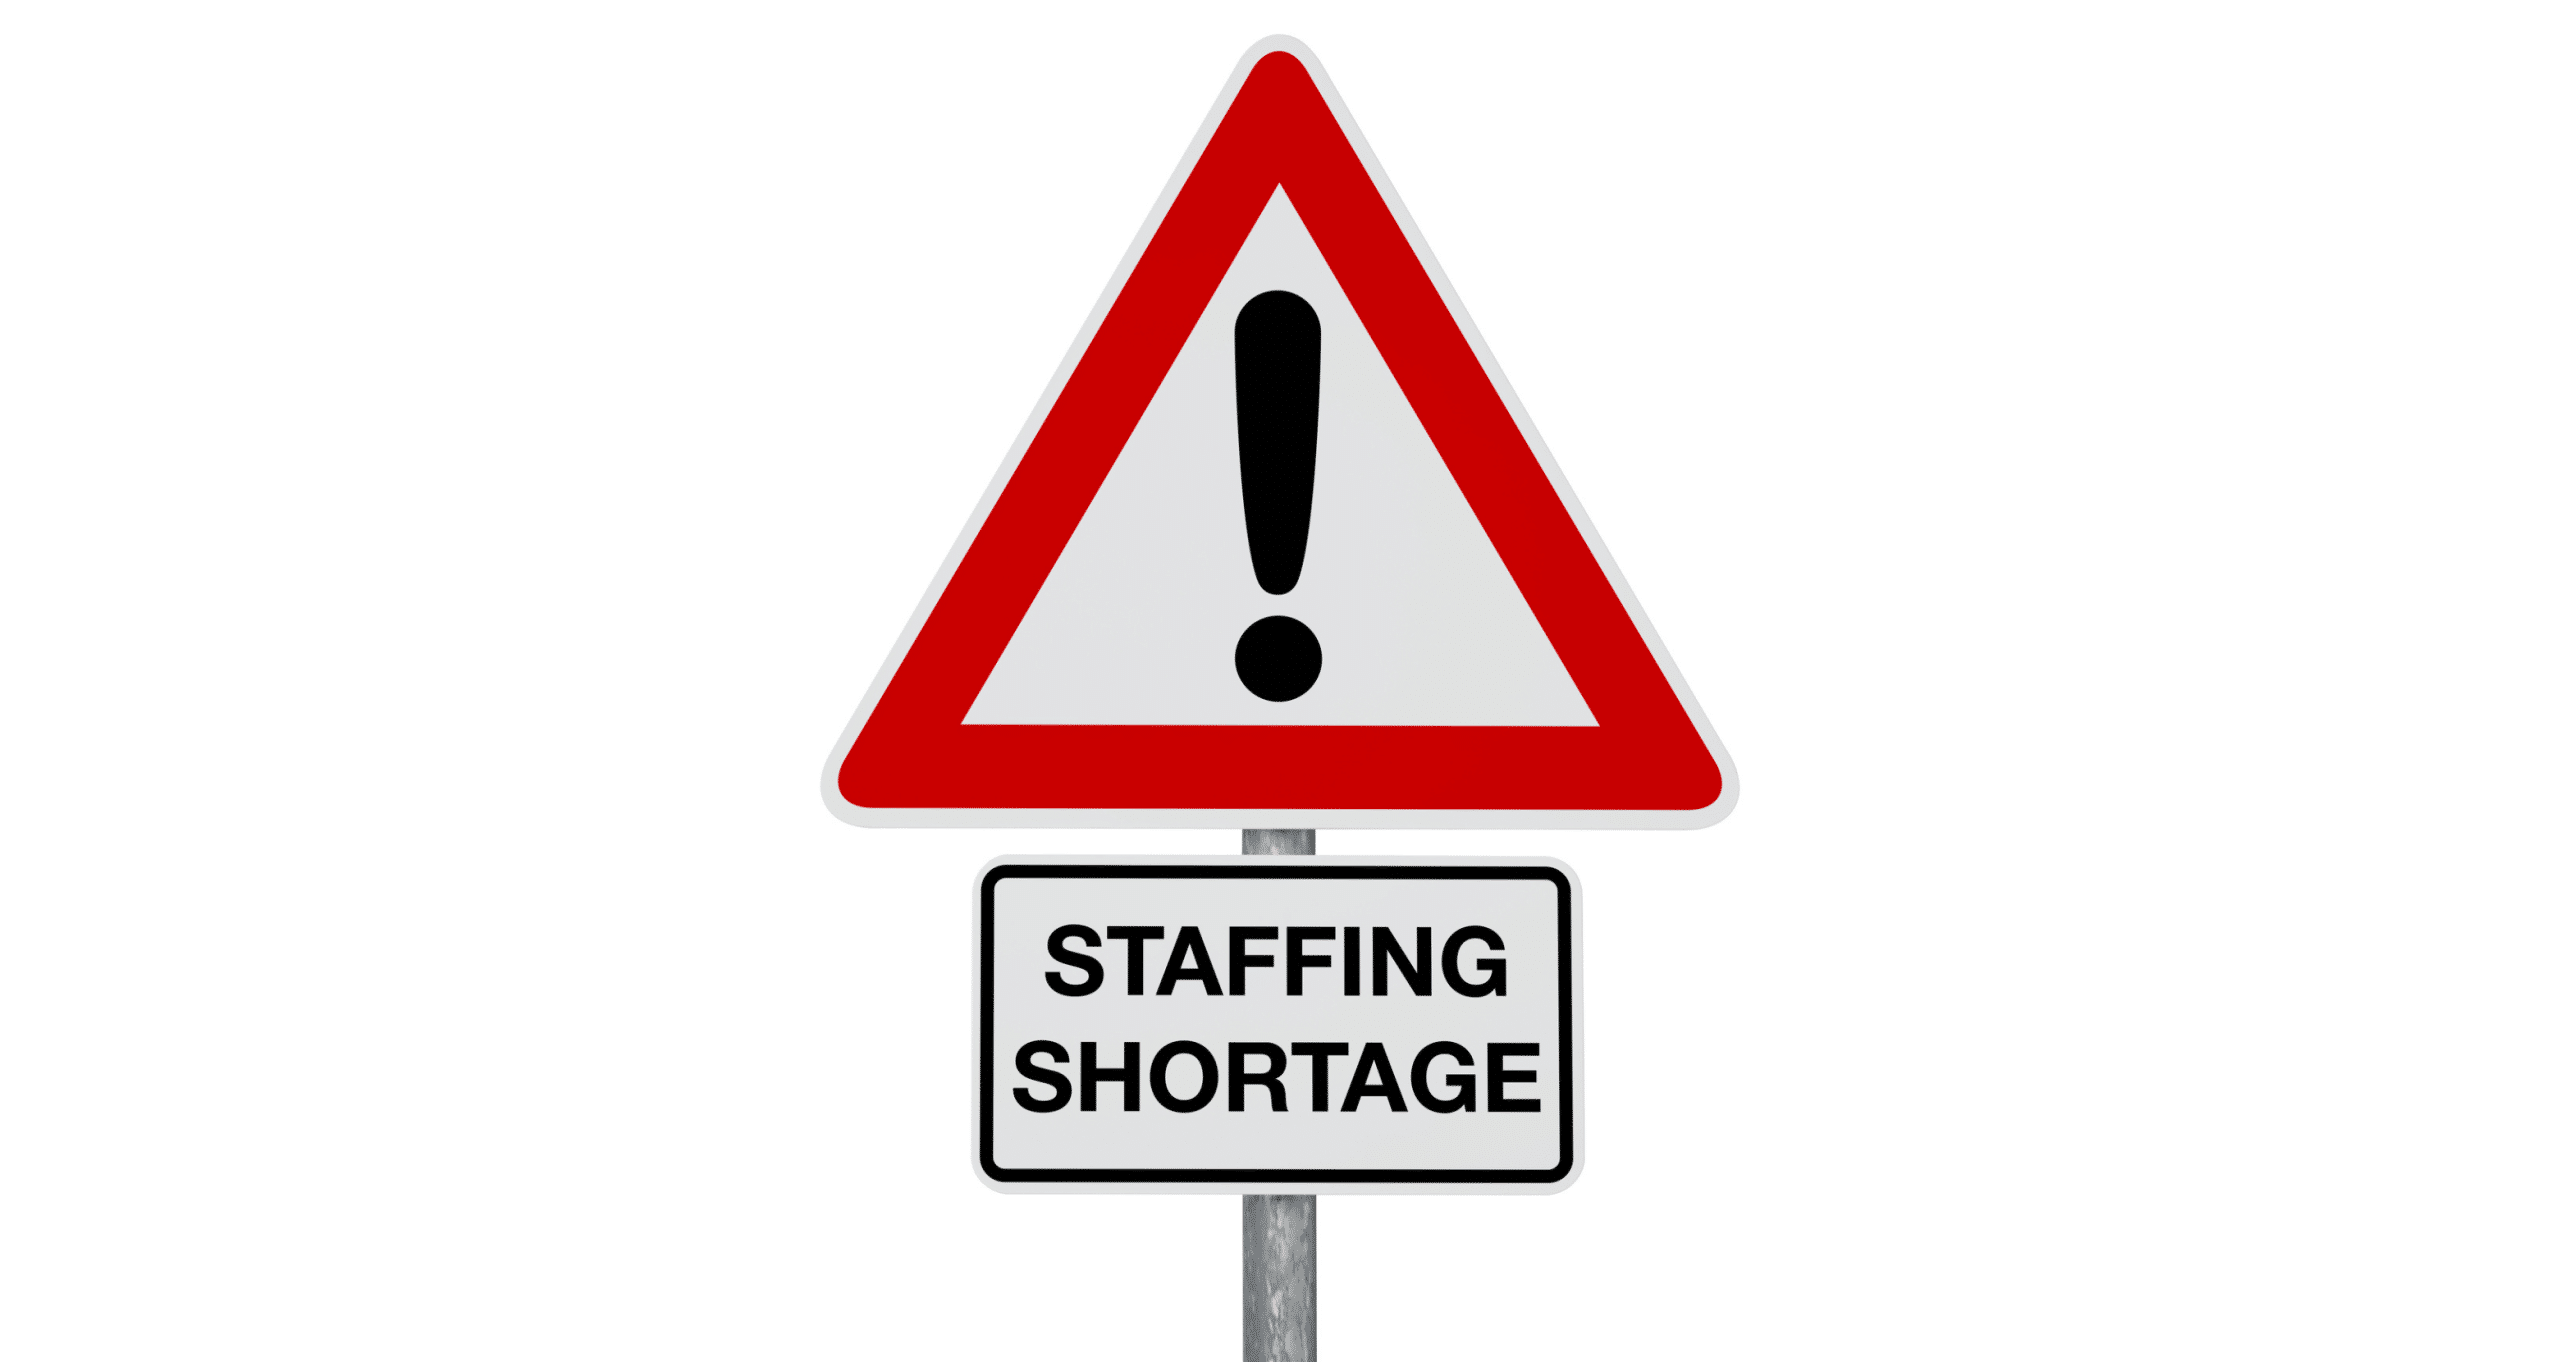 SNF Minimum Staffing Standard Published: Tell CMS How New Mandate will Impact your SNFs and Access to Care